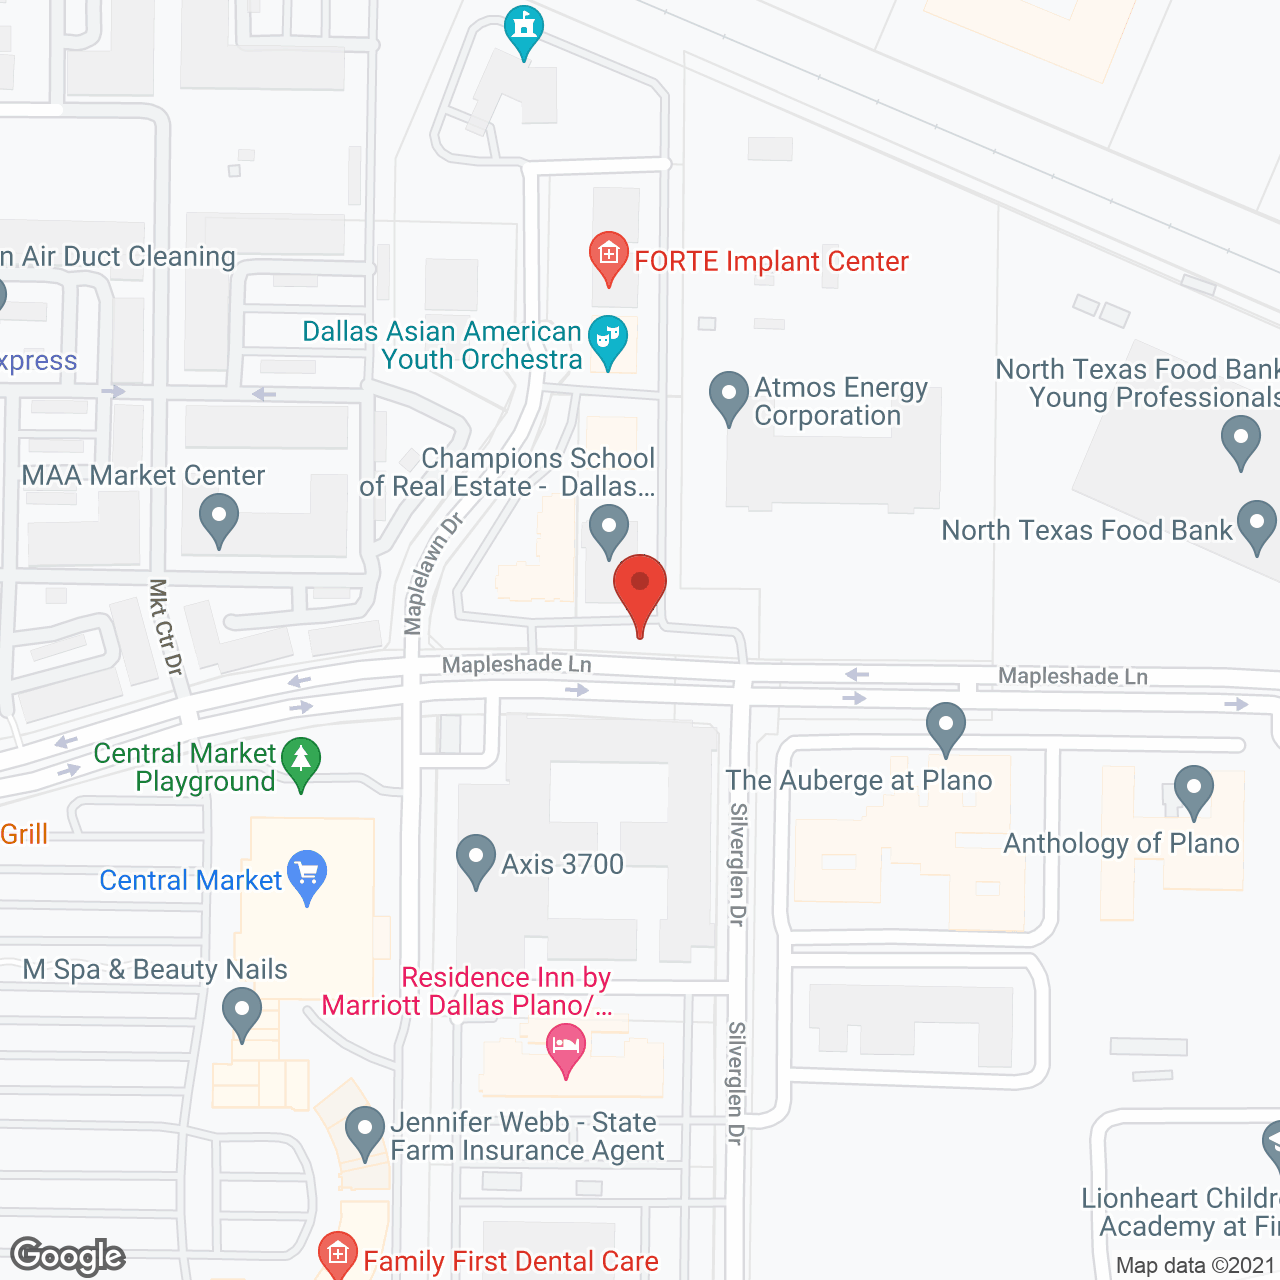 Anthology of Plano in google map